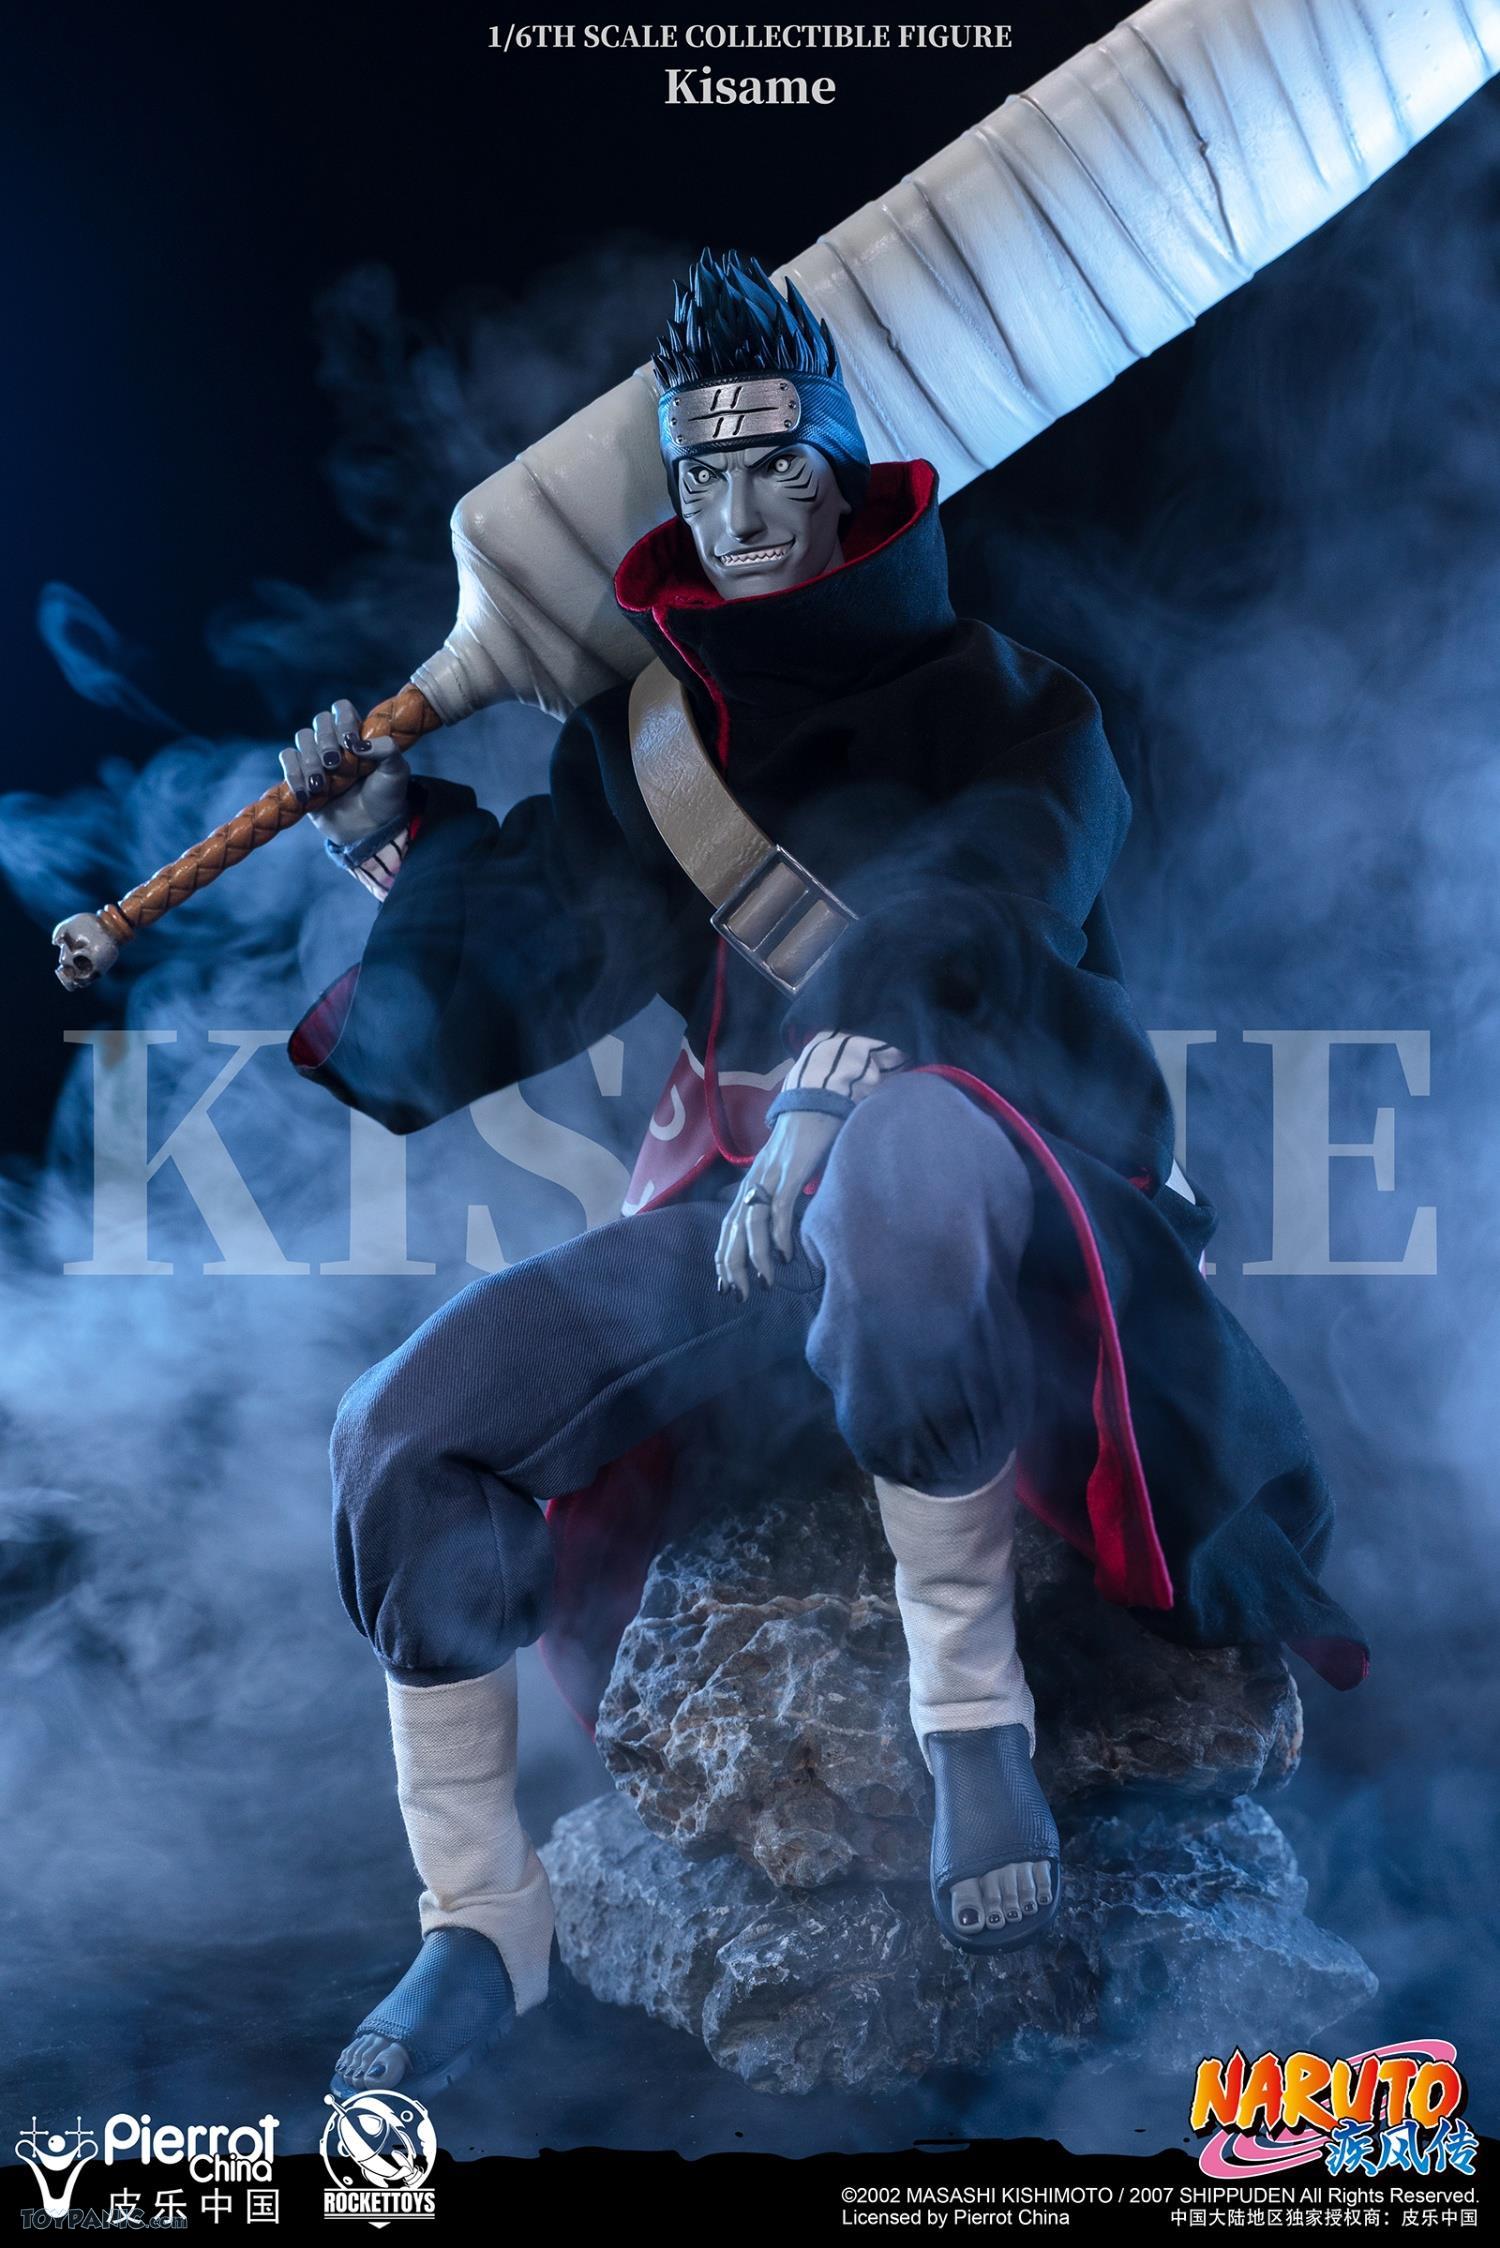 male - NEW PRODUCT: Rocket Toys ROC-007 1/6 Scale Kisame 221202460434PM_5686661